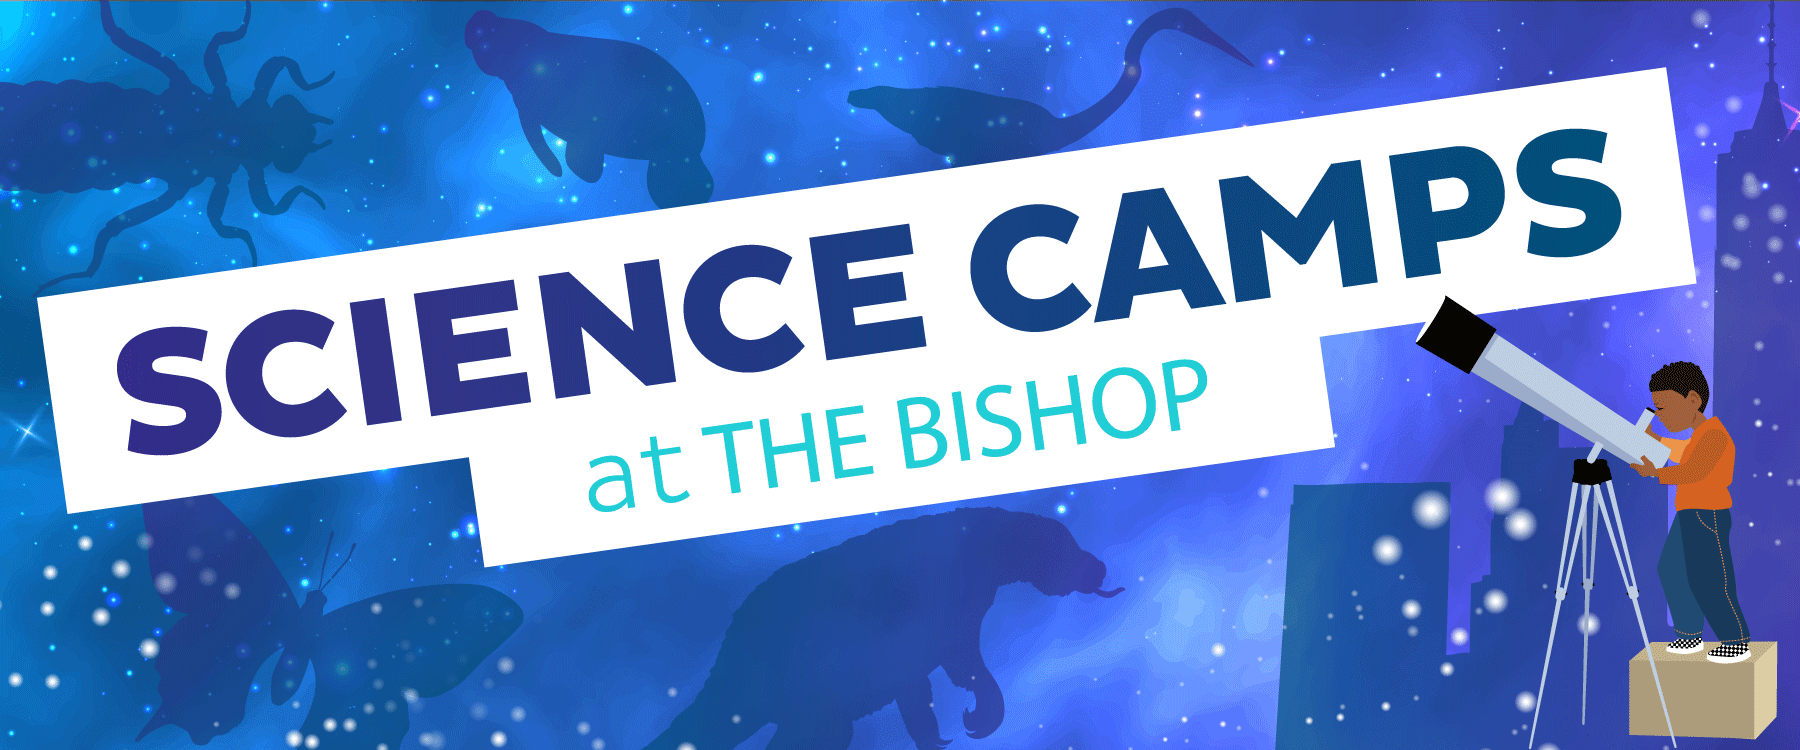 Science Camps at The Bishop